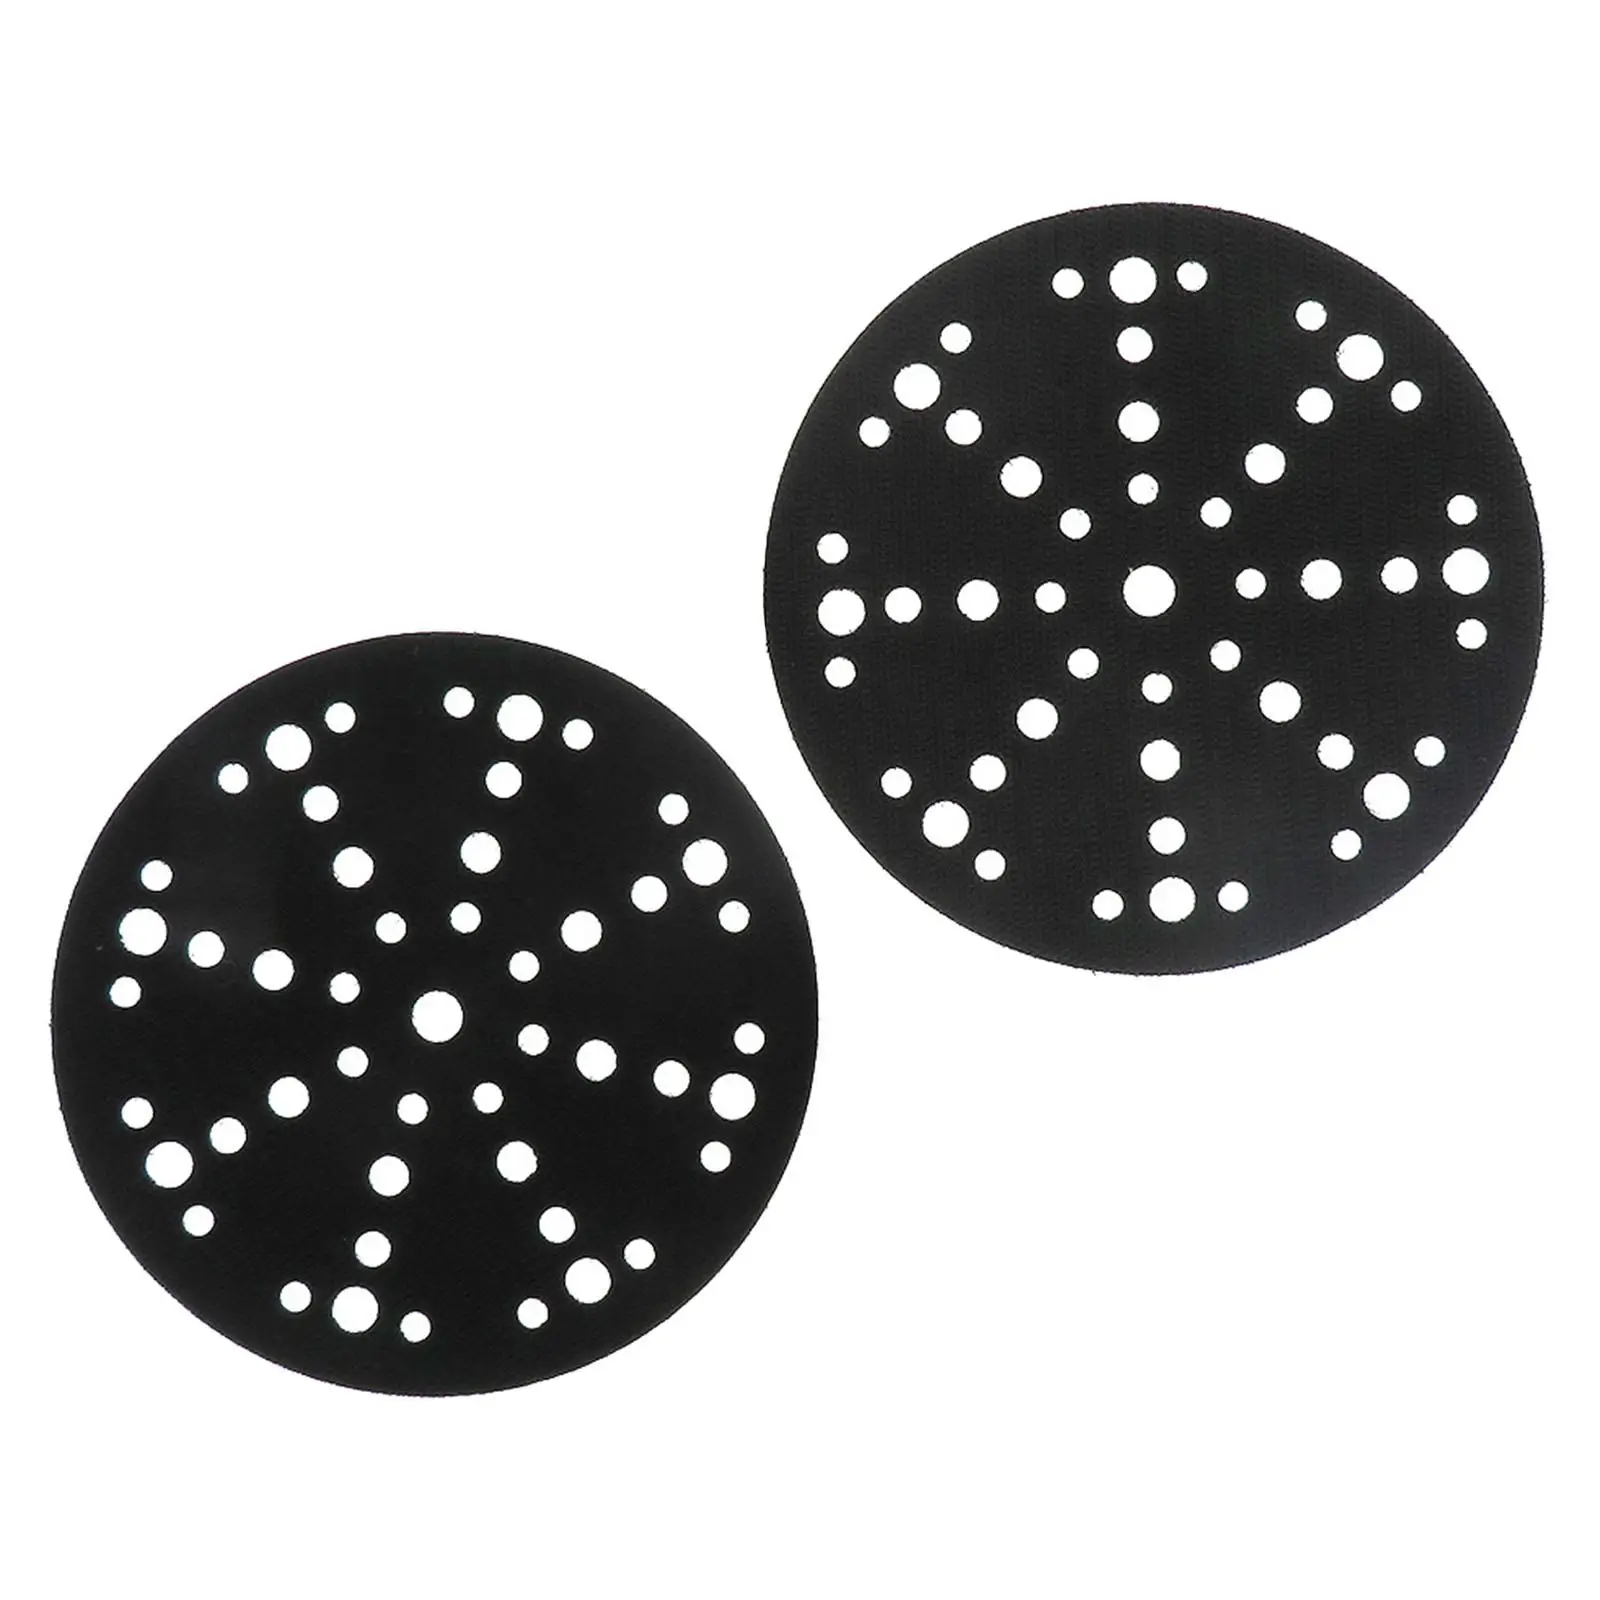 2x Sandpaper Disc Pads 6Inches 48 Holes Practical Grinding Plates Durable Backing Grinding Polishing Pad Disc for Polisher